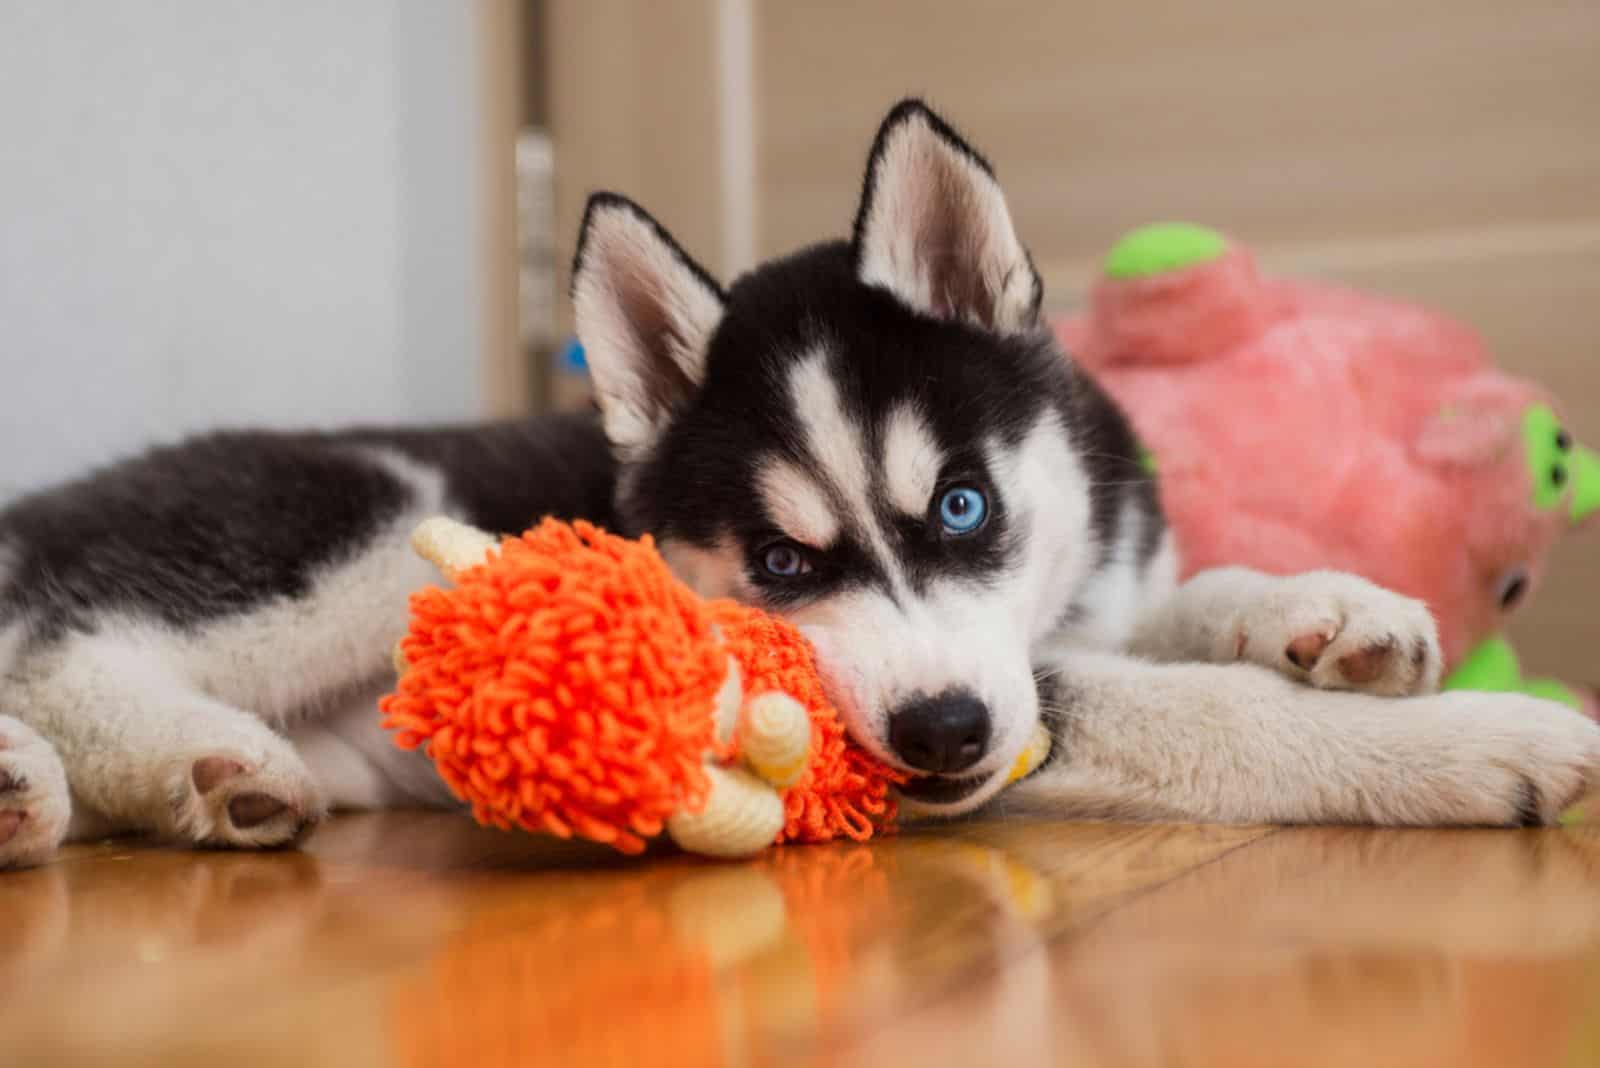 Huskies lie on the floor and play with a toy